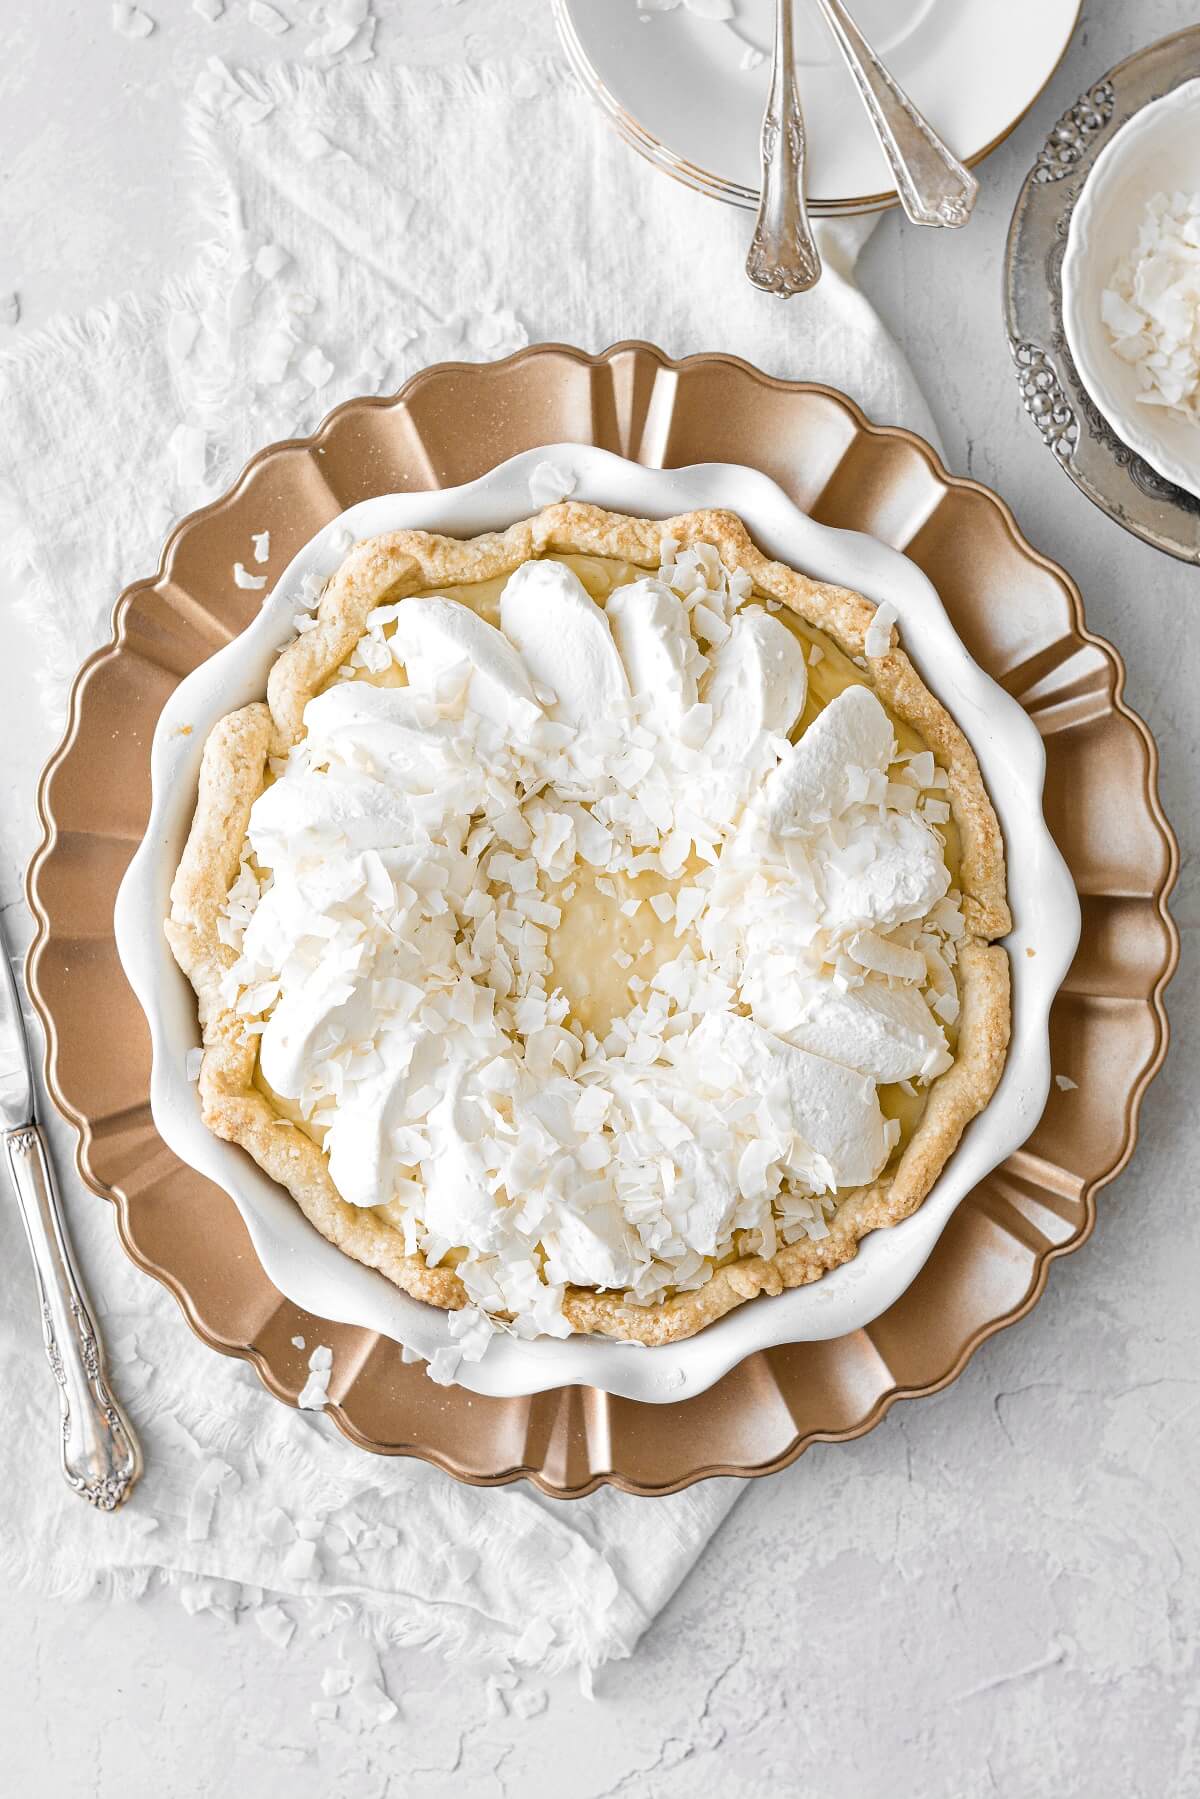 Coconut cream pie on a gold charger plate.